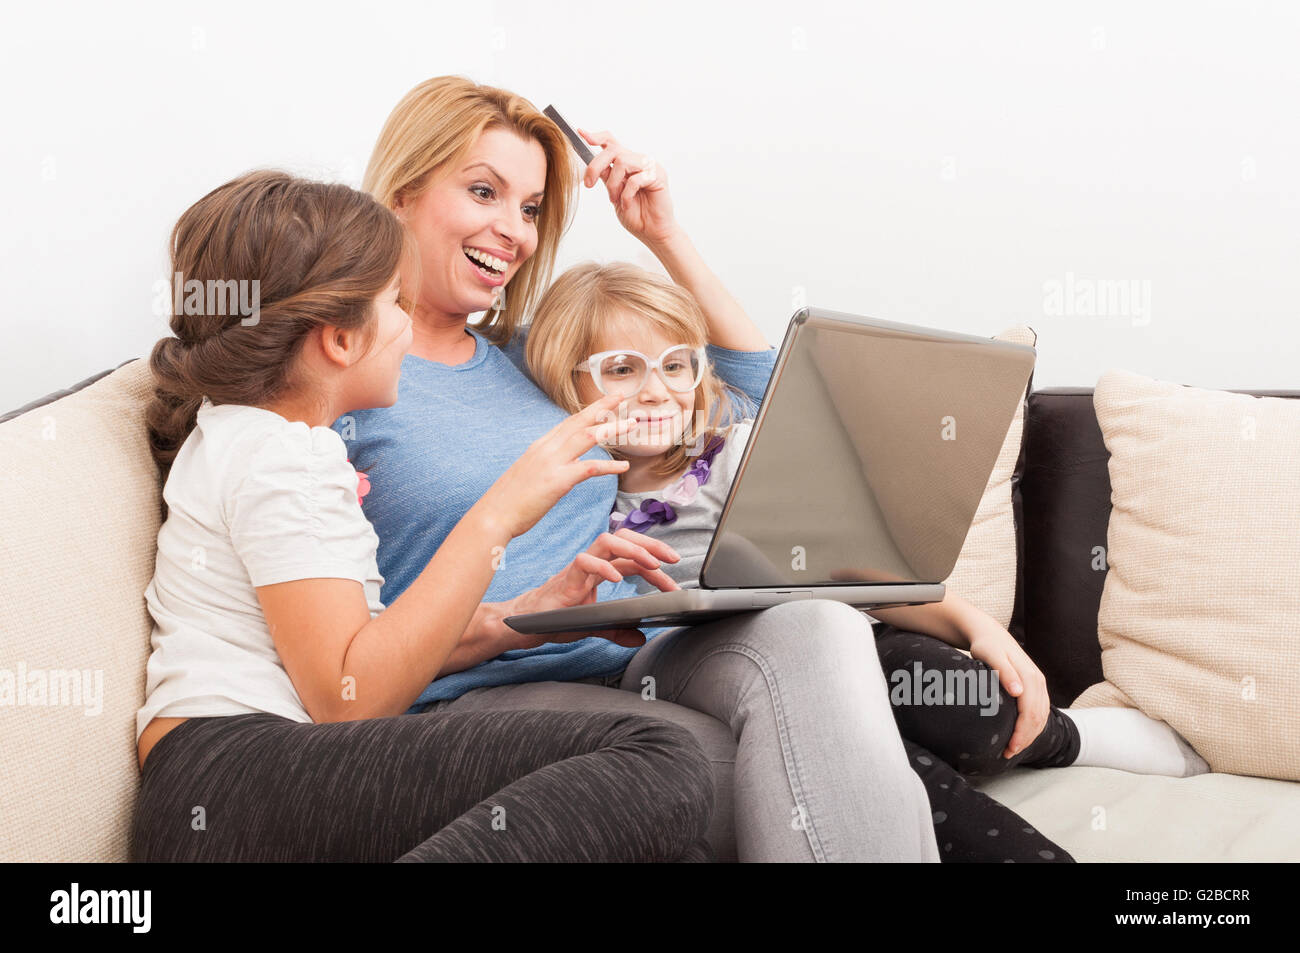 Mother and daughters shopping online using laptop smiling on the couch or sofa Stock Photo